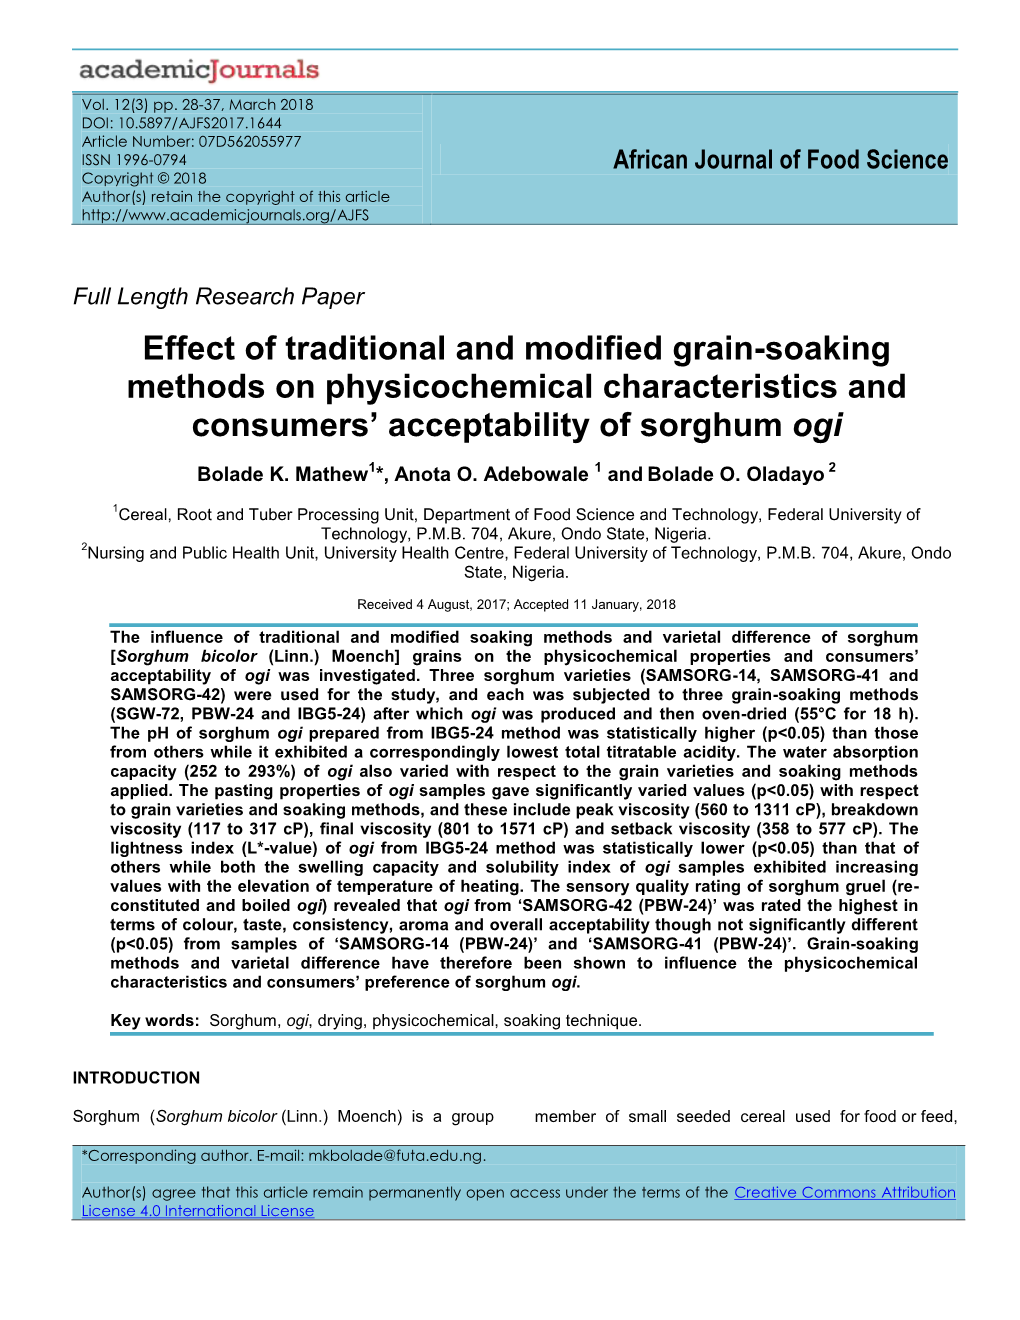 Effect of Traditional and Modified Grain-Soaking Methods on Physicochemical Characteristics and Consumers’ Acceptability of Sorghum Ogi